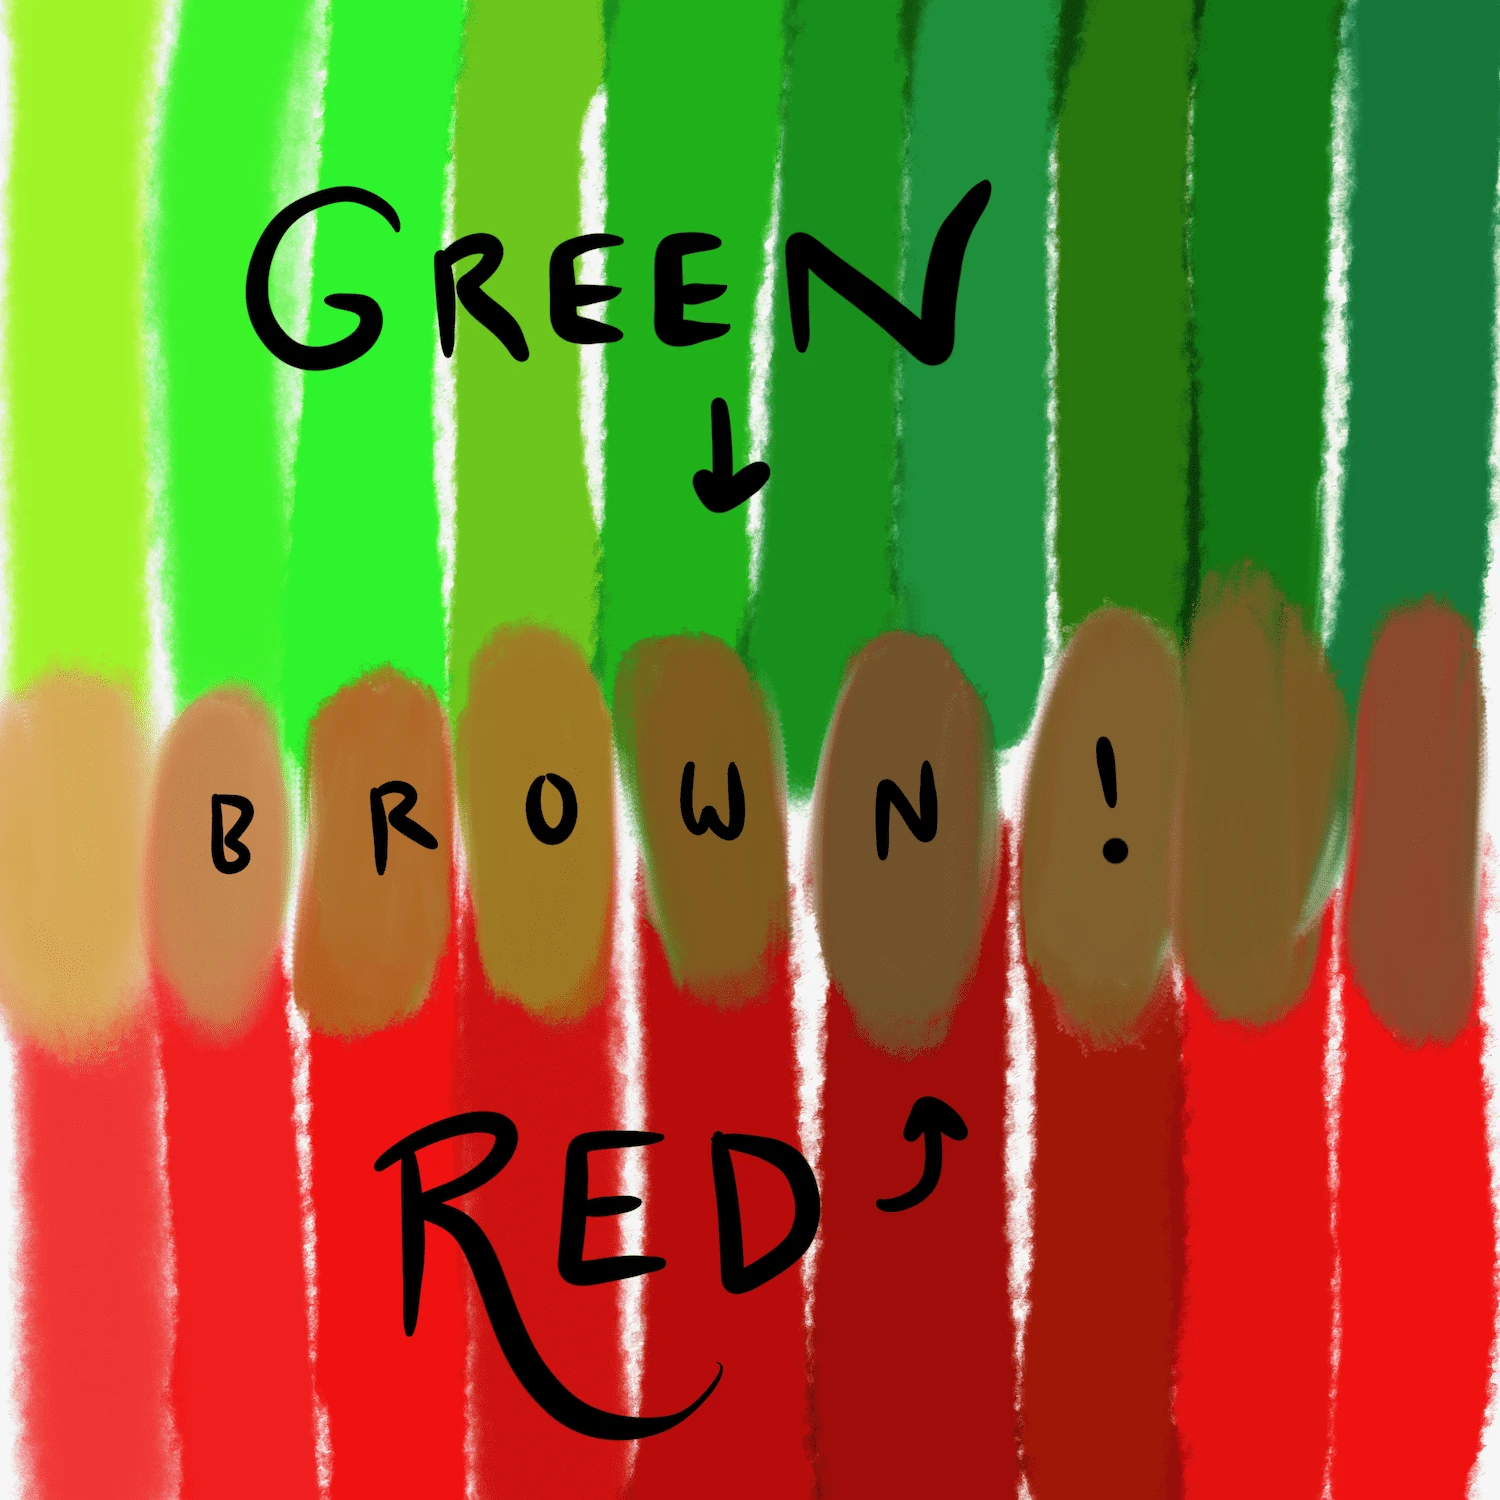 What color do red and green make?